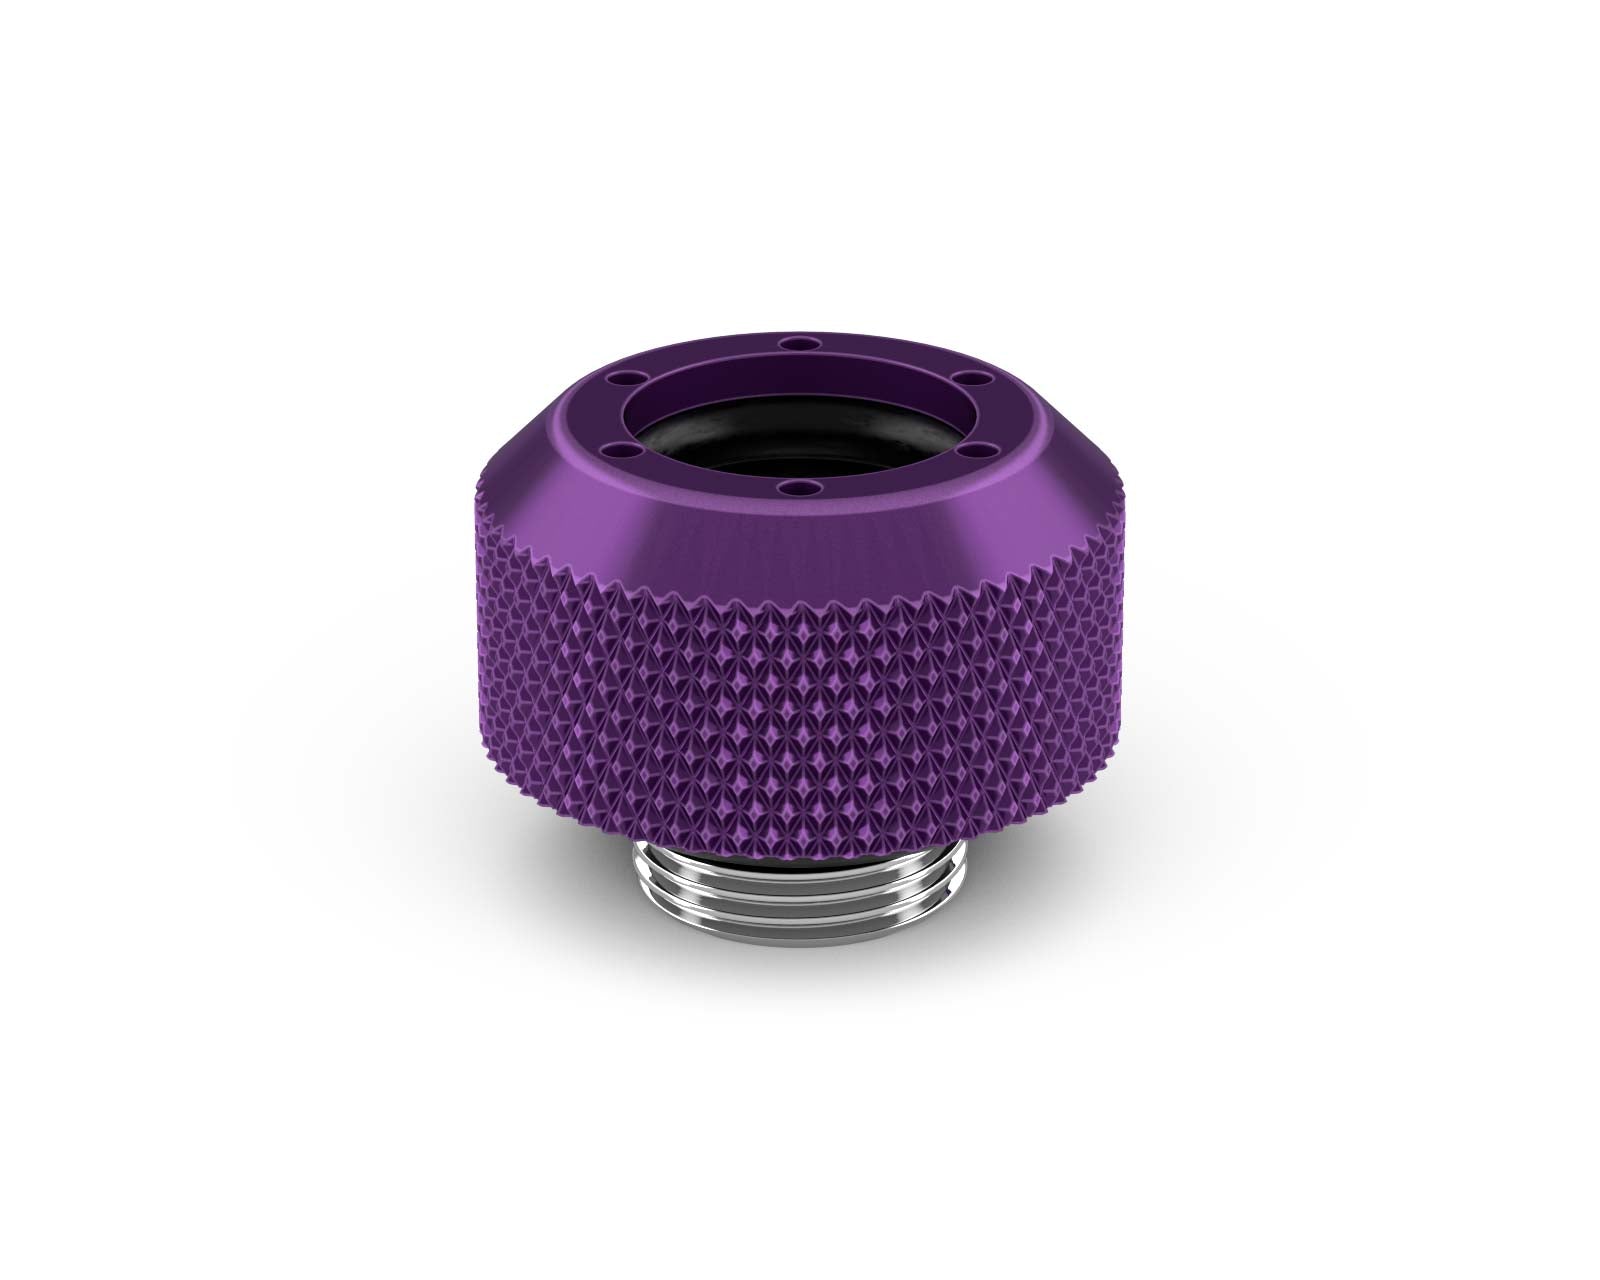 PrimoChill 1/2in. Rigid RevolverSX Series Fitting - PrimoChill - KEEPING IT COOL Candy Purple